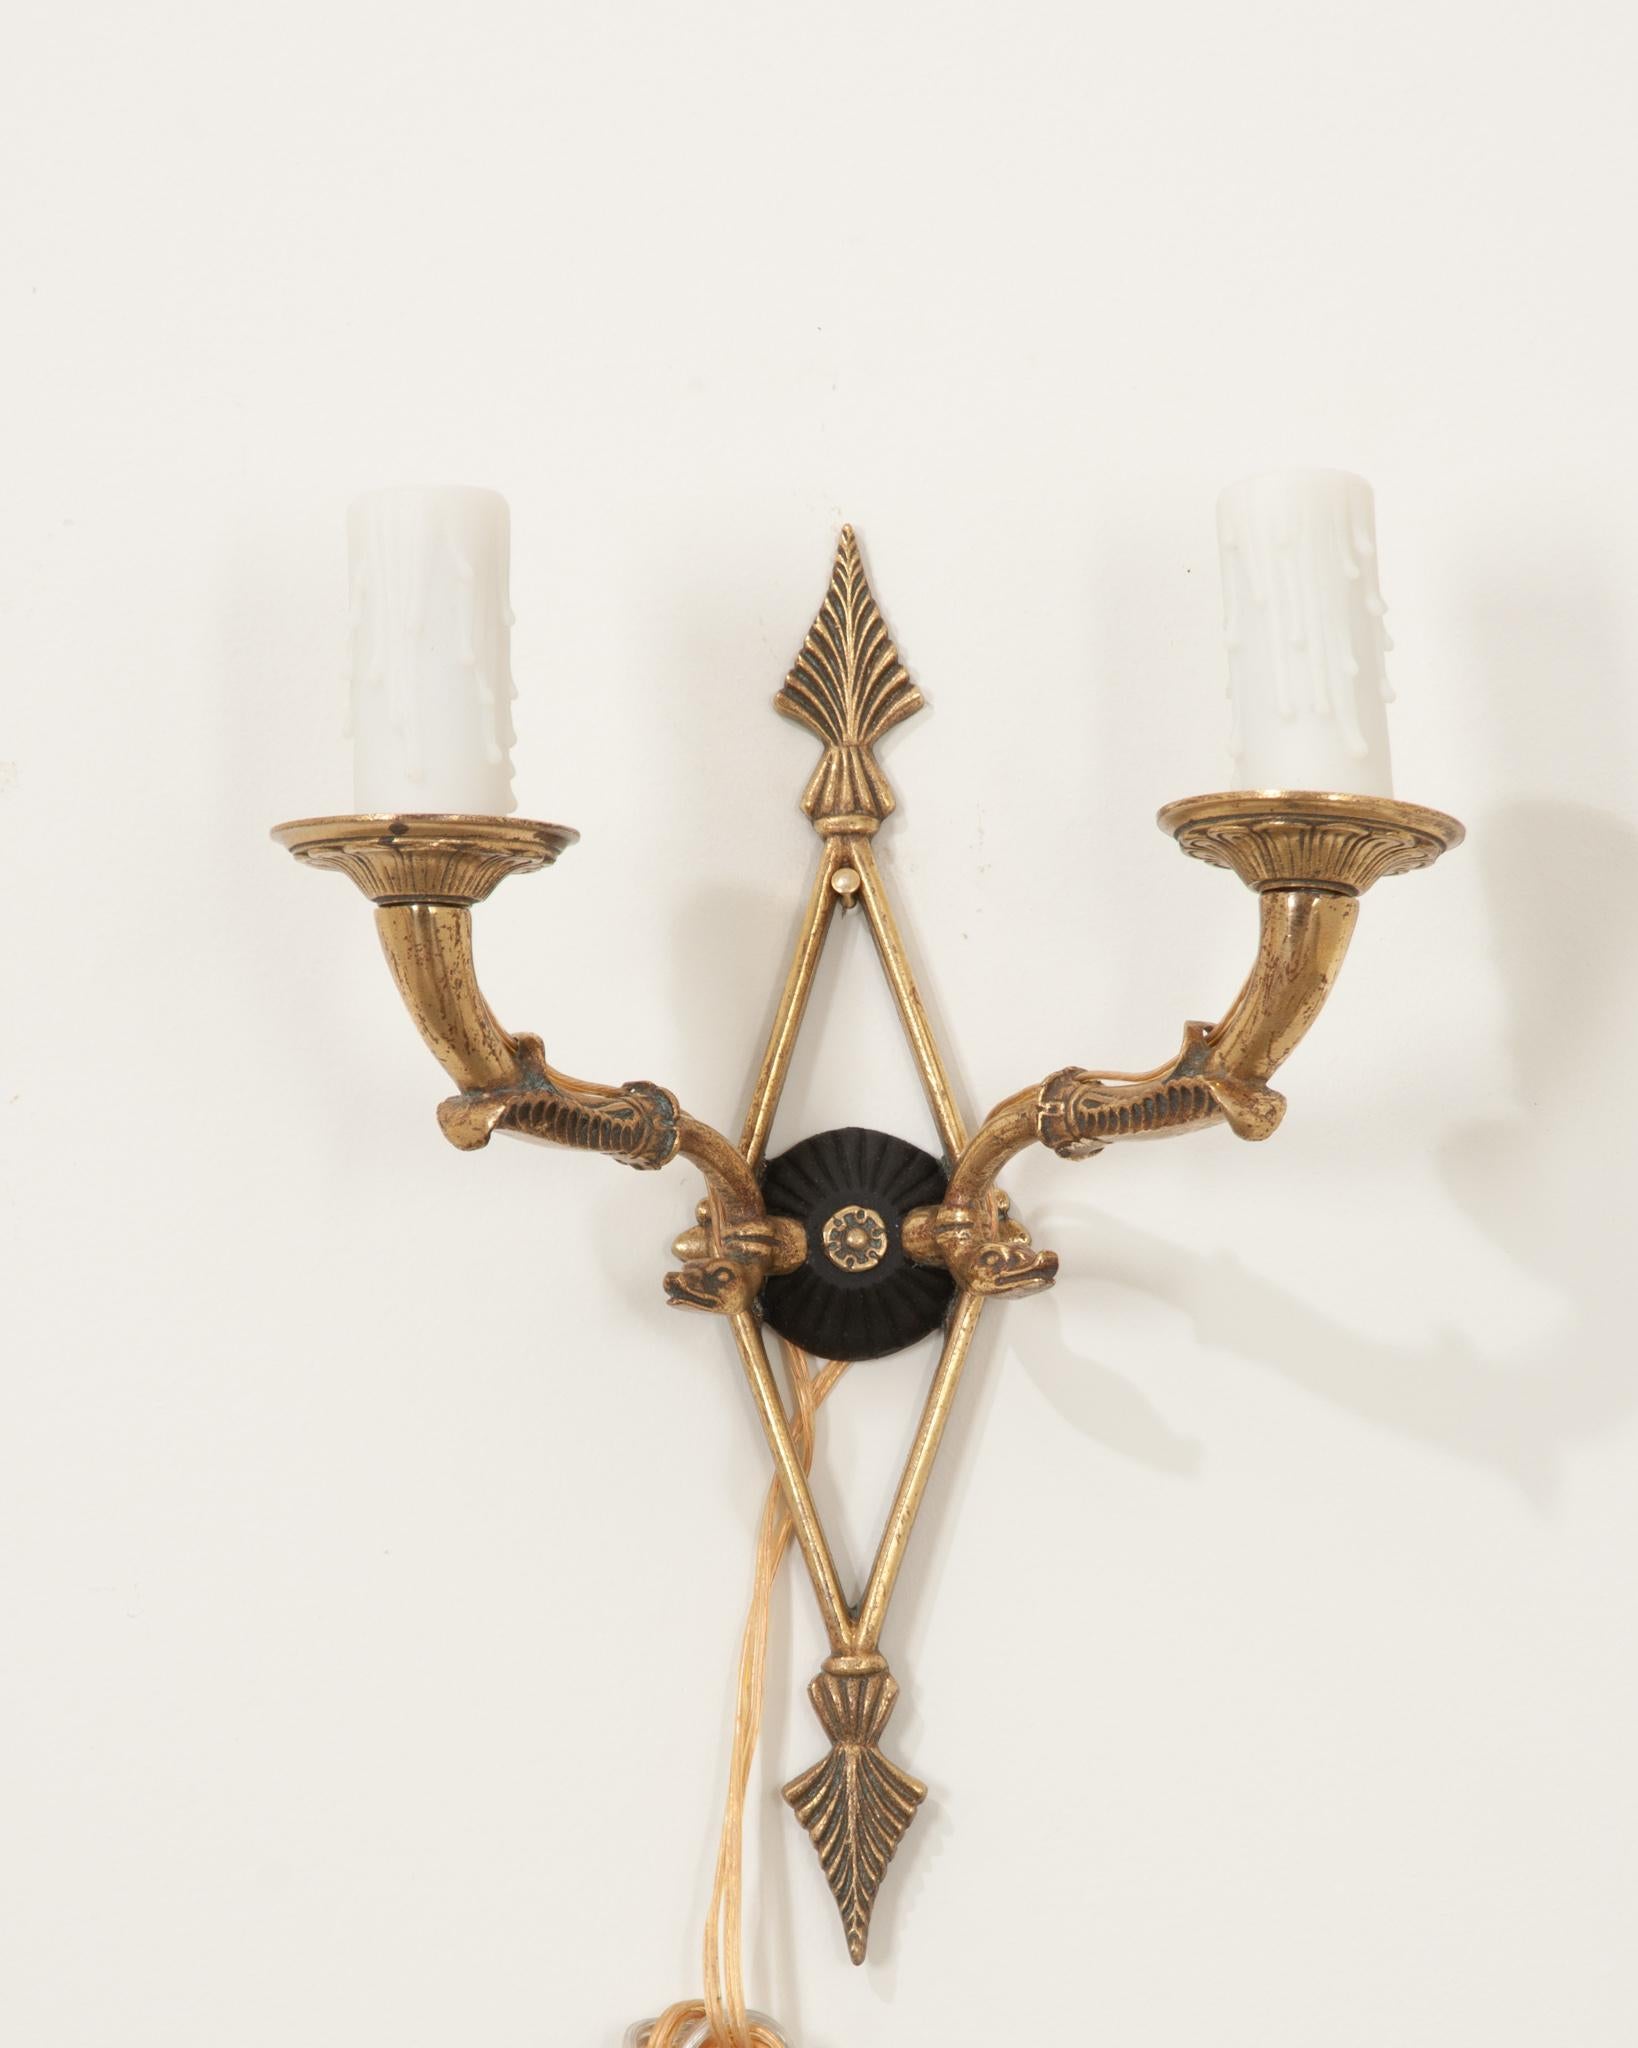 A single petite Empire sconce of classic French design. Perfect for that small space that needs a little extra light. Cleaned and US wired using UL listed parts.